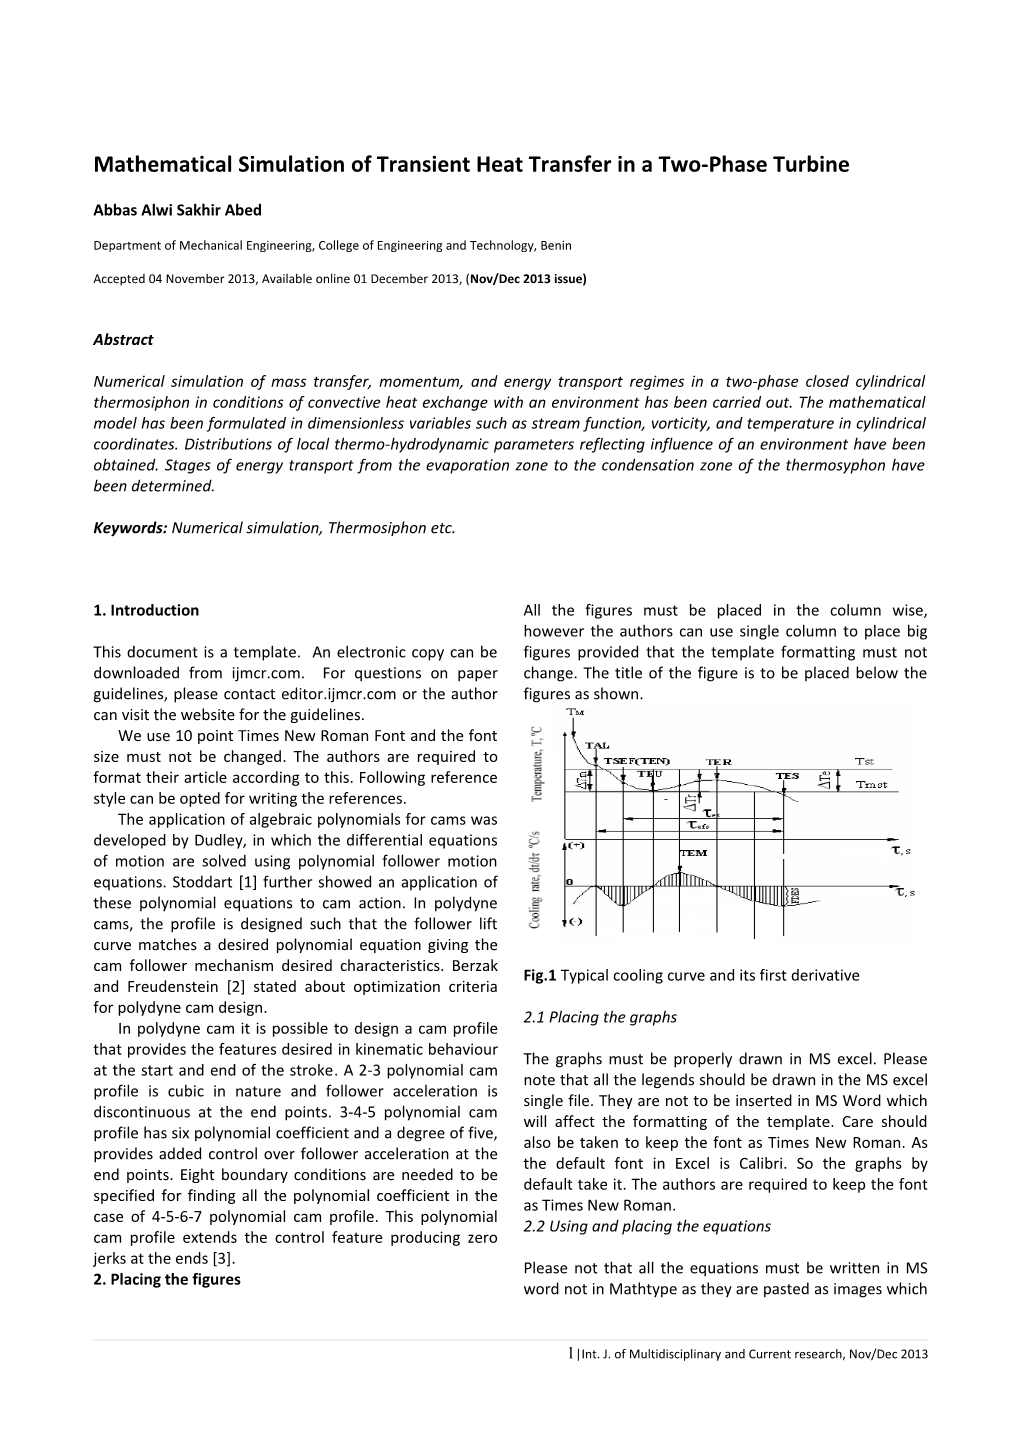 Mathematical Simulation of Transient Heat Transfer in a Two-Phase Turbine